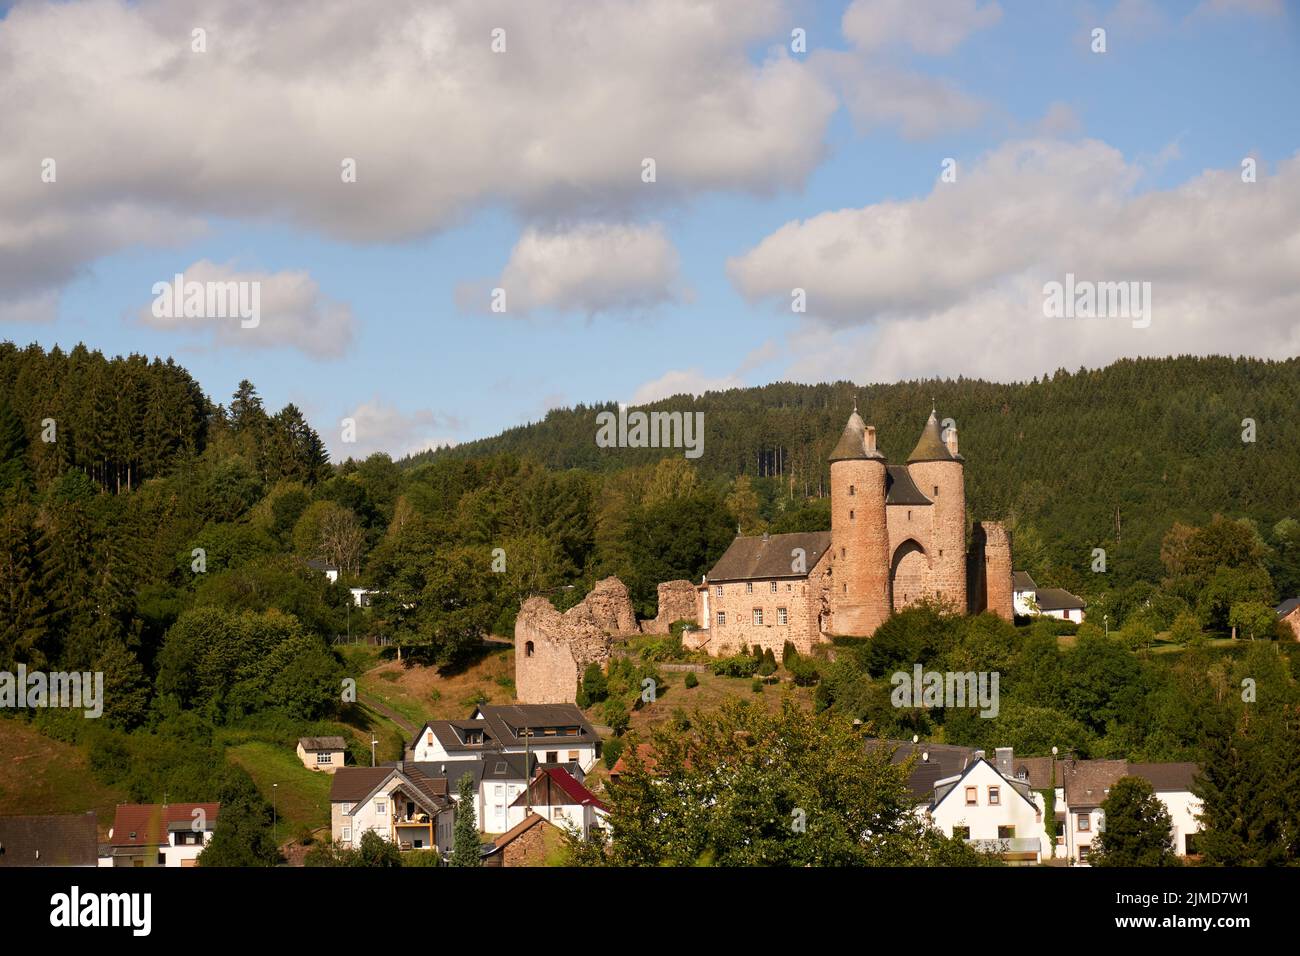 Landscape photo of Muerlenbach in the Eifel, Germany in spring with the Bertrada castle. Stock Photo